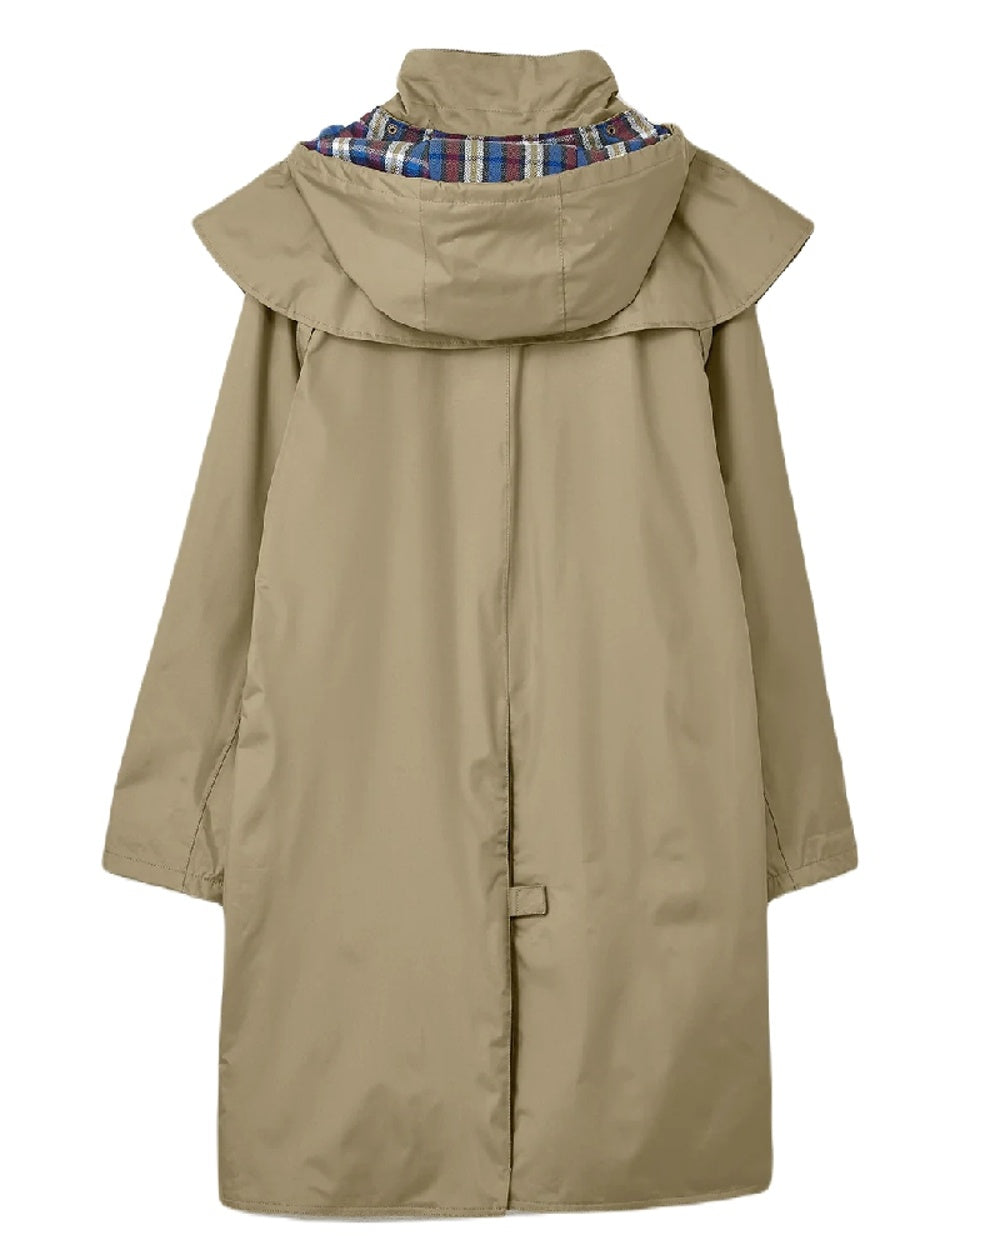 Fawn coloured Lighthouse Outrider 3/4 Length Ladies Waterproof Raincoat on White background 